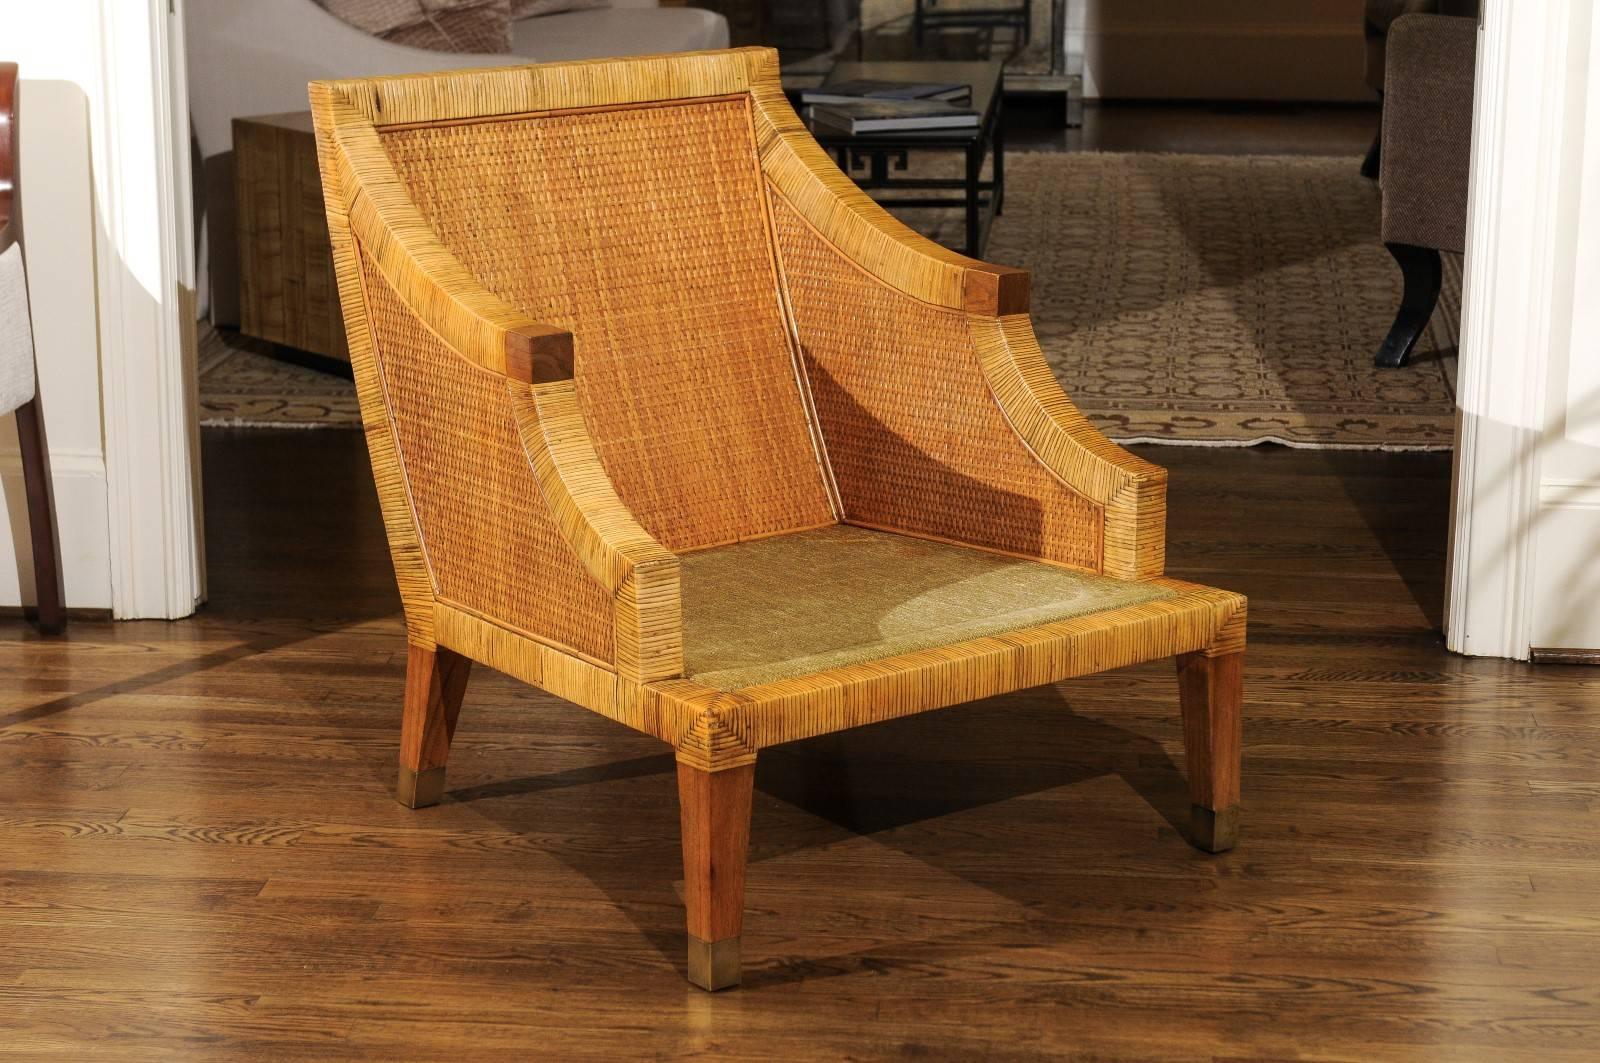 A beautiful pair of large-scale club chairs by Bielecky Brothers, circa 1980. A boutique production design not often found. Expertly crafted hardwood form painstakingly wrapped in cane with raffia cane panel insets. Zebra Wood arm accents and legs;